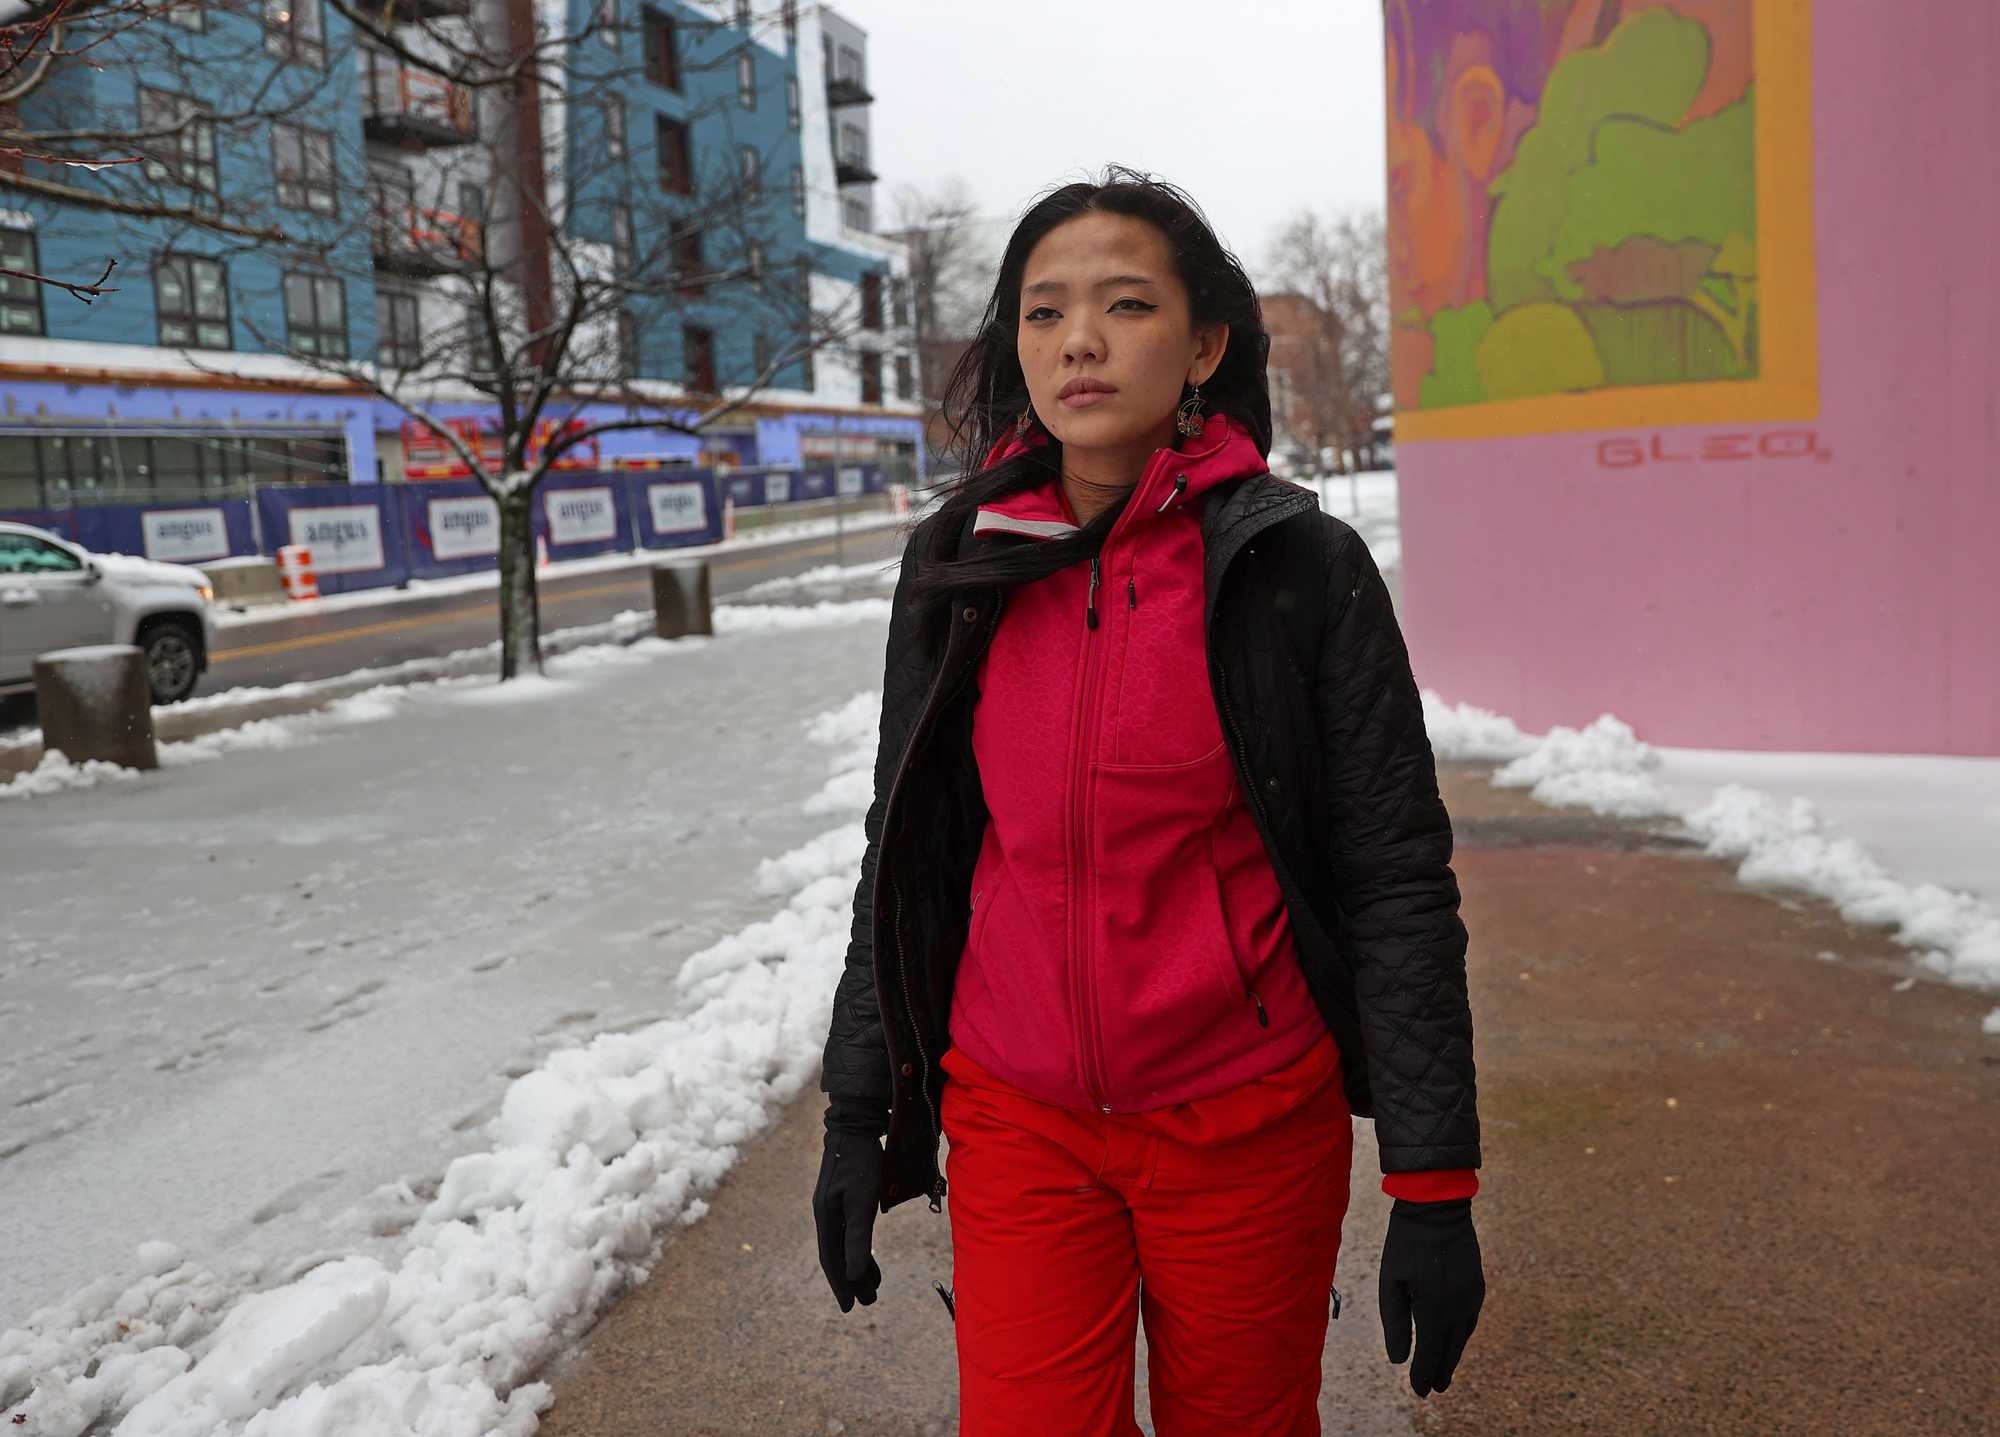 Fiona Phie walked near Umana Academy, where they went to elementary school. They live with their mom and younger brother in an East Boston home their immigrant parents bought decades ago.